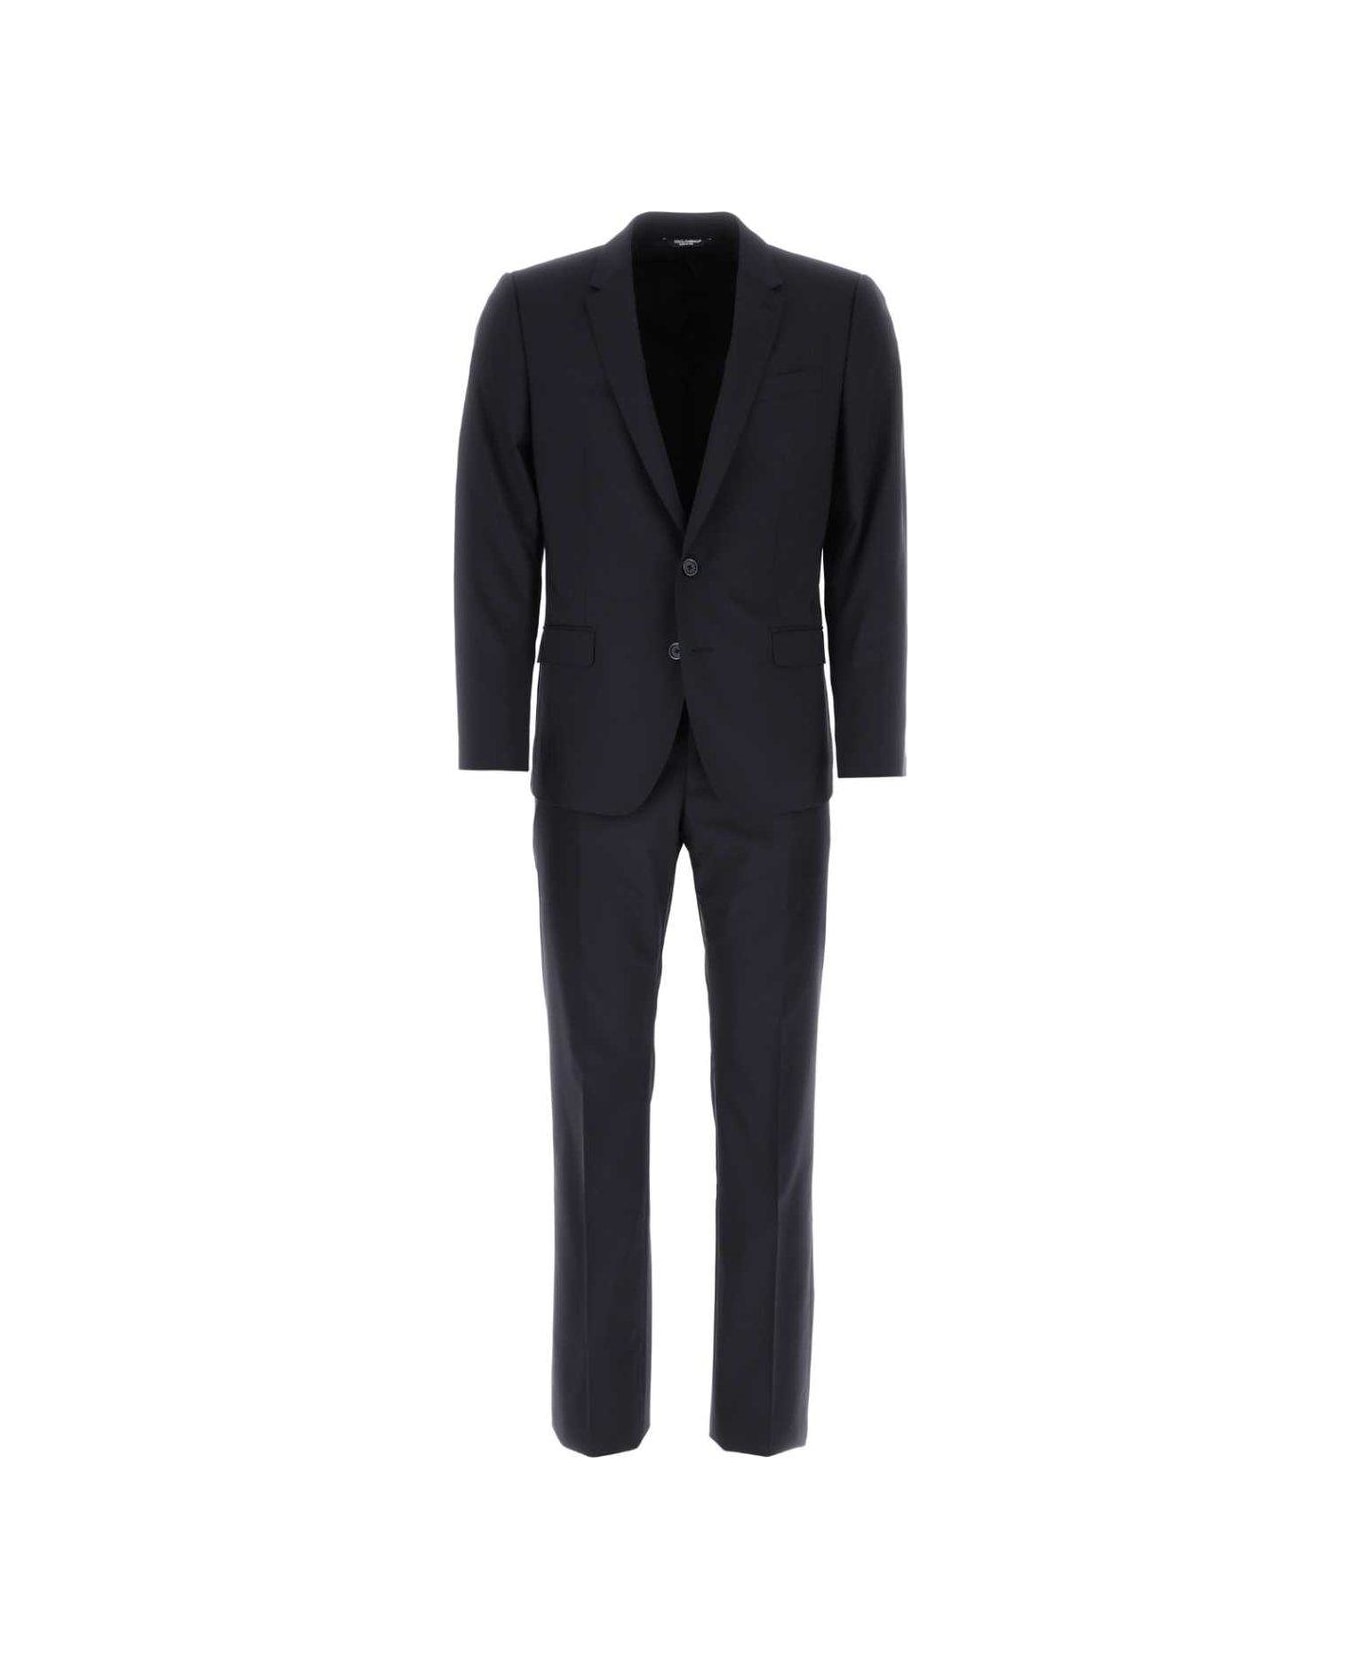 Dolce & Gabbana Single Breasted Tailored Suit - Blu navy